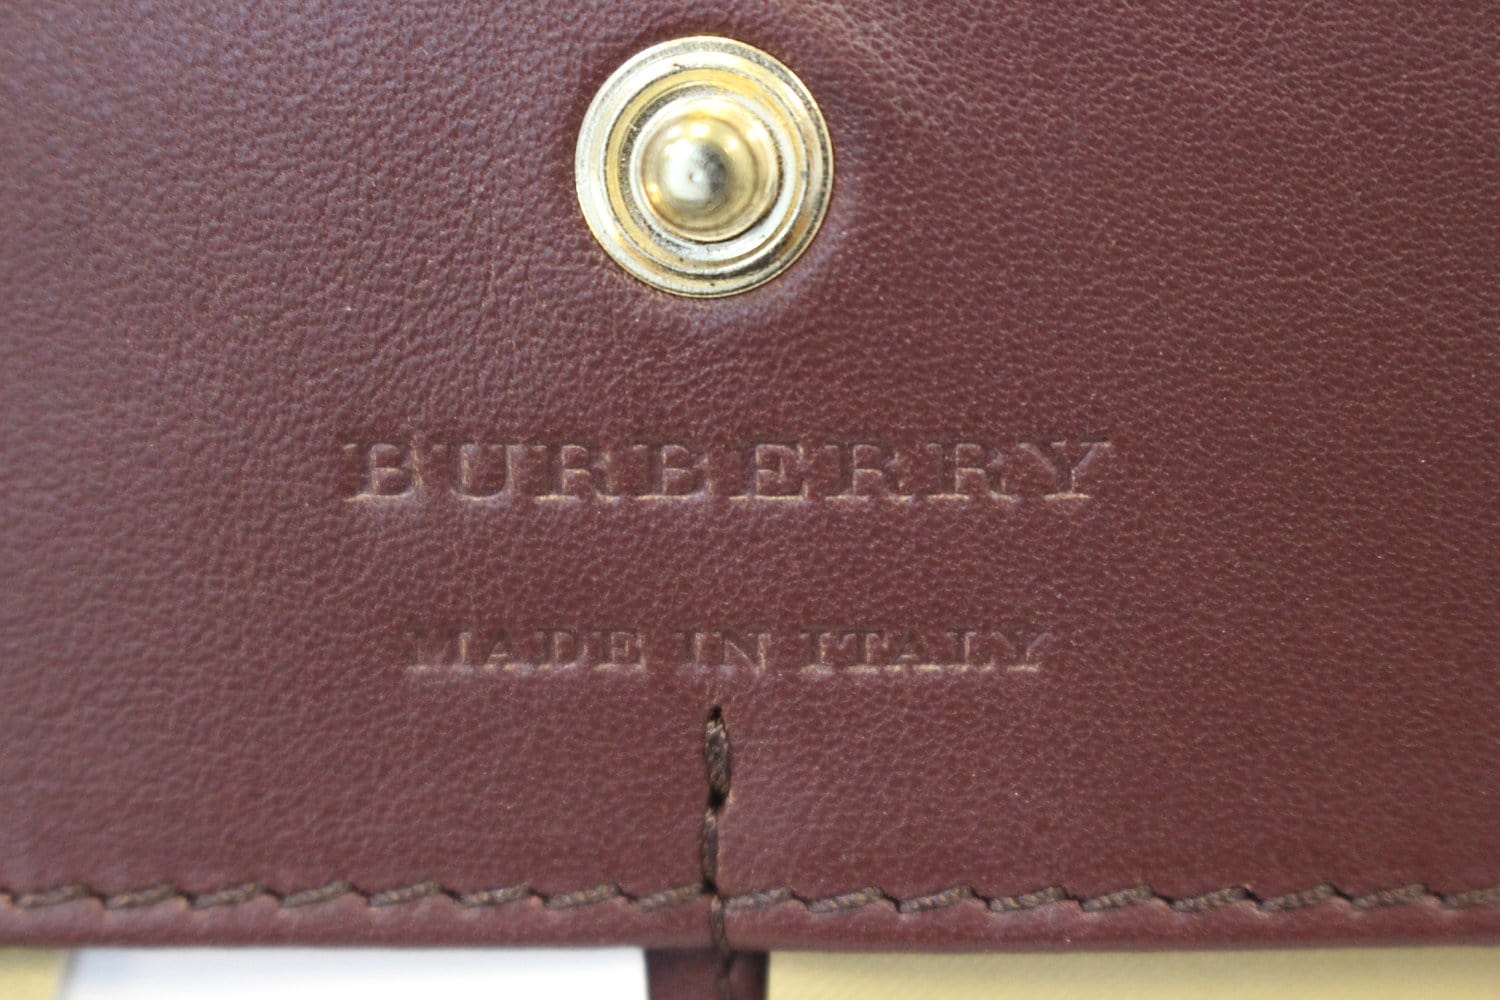 womens Burberry wallet. Used like new. Small signs